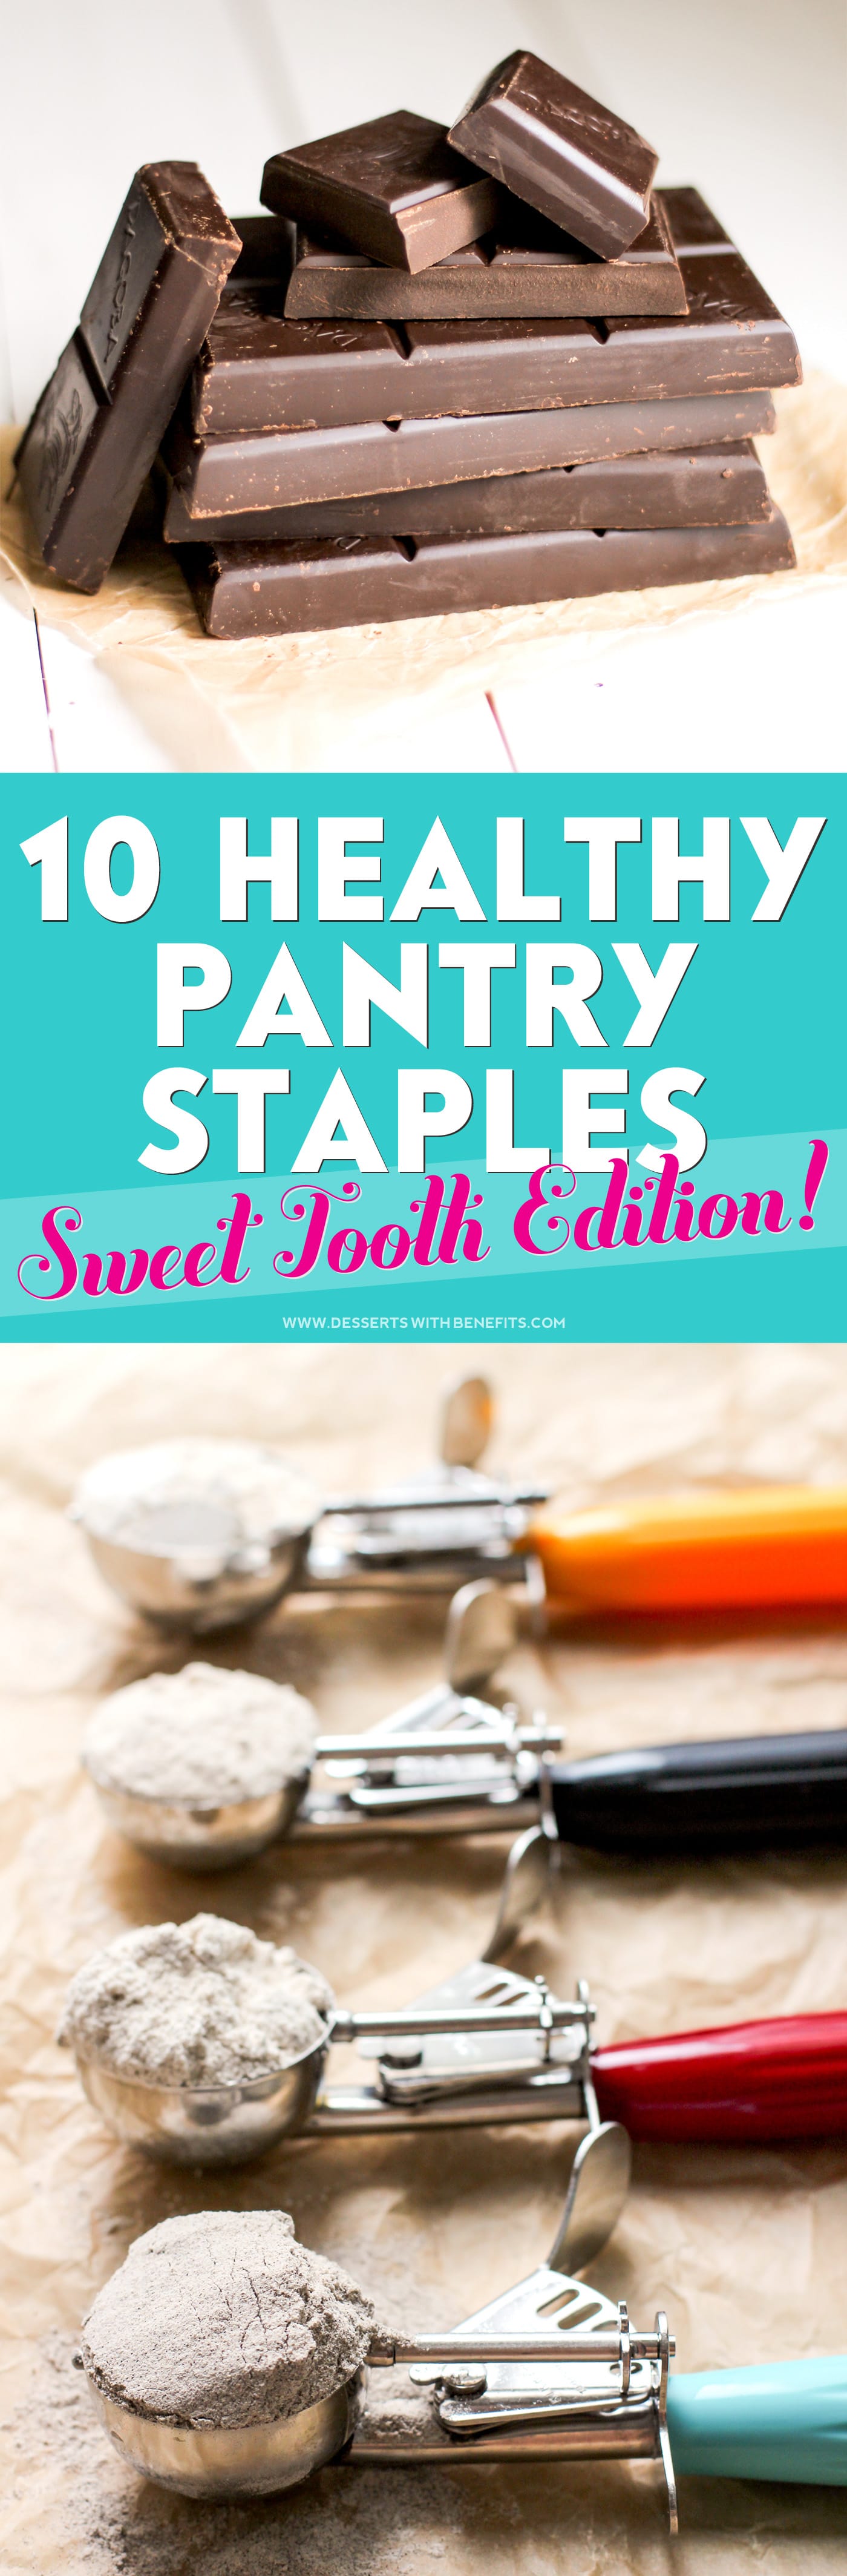 10 Healthy Pantry Staples for the Busy AND Hungry (Sweet Tooth Edition) – if you’ve ever wondered how you can live a healthy lifestyle with dessert on the side, this is the guide for you! Healthy Dessert Recipes at Desserts with Benefits